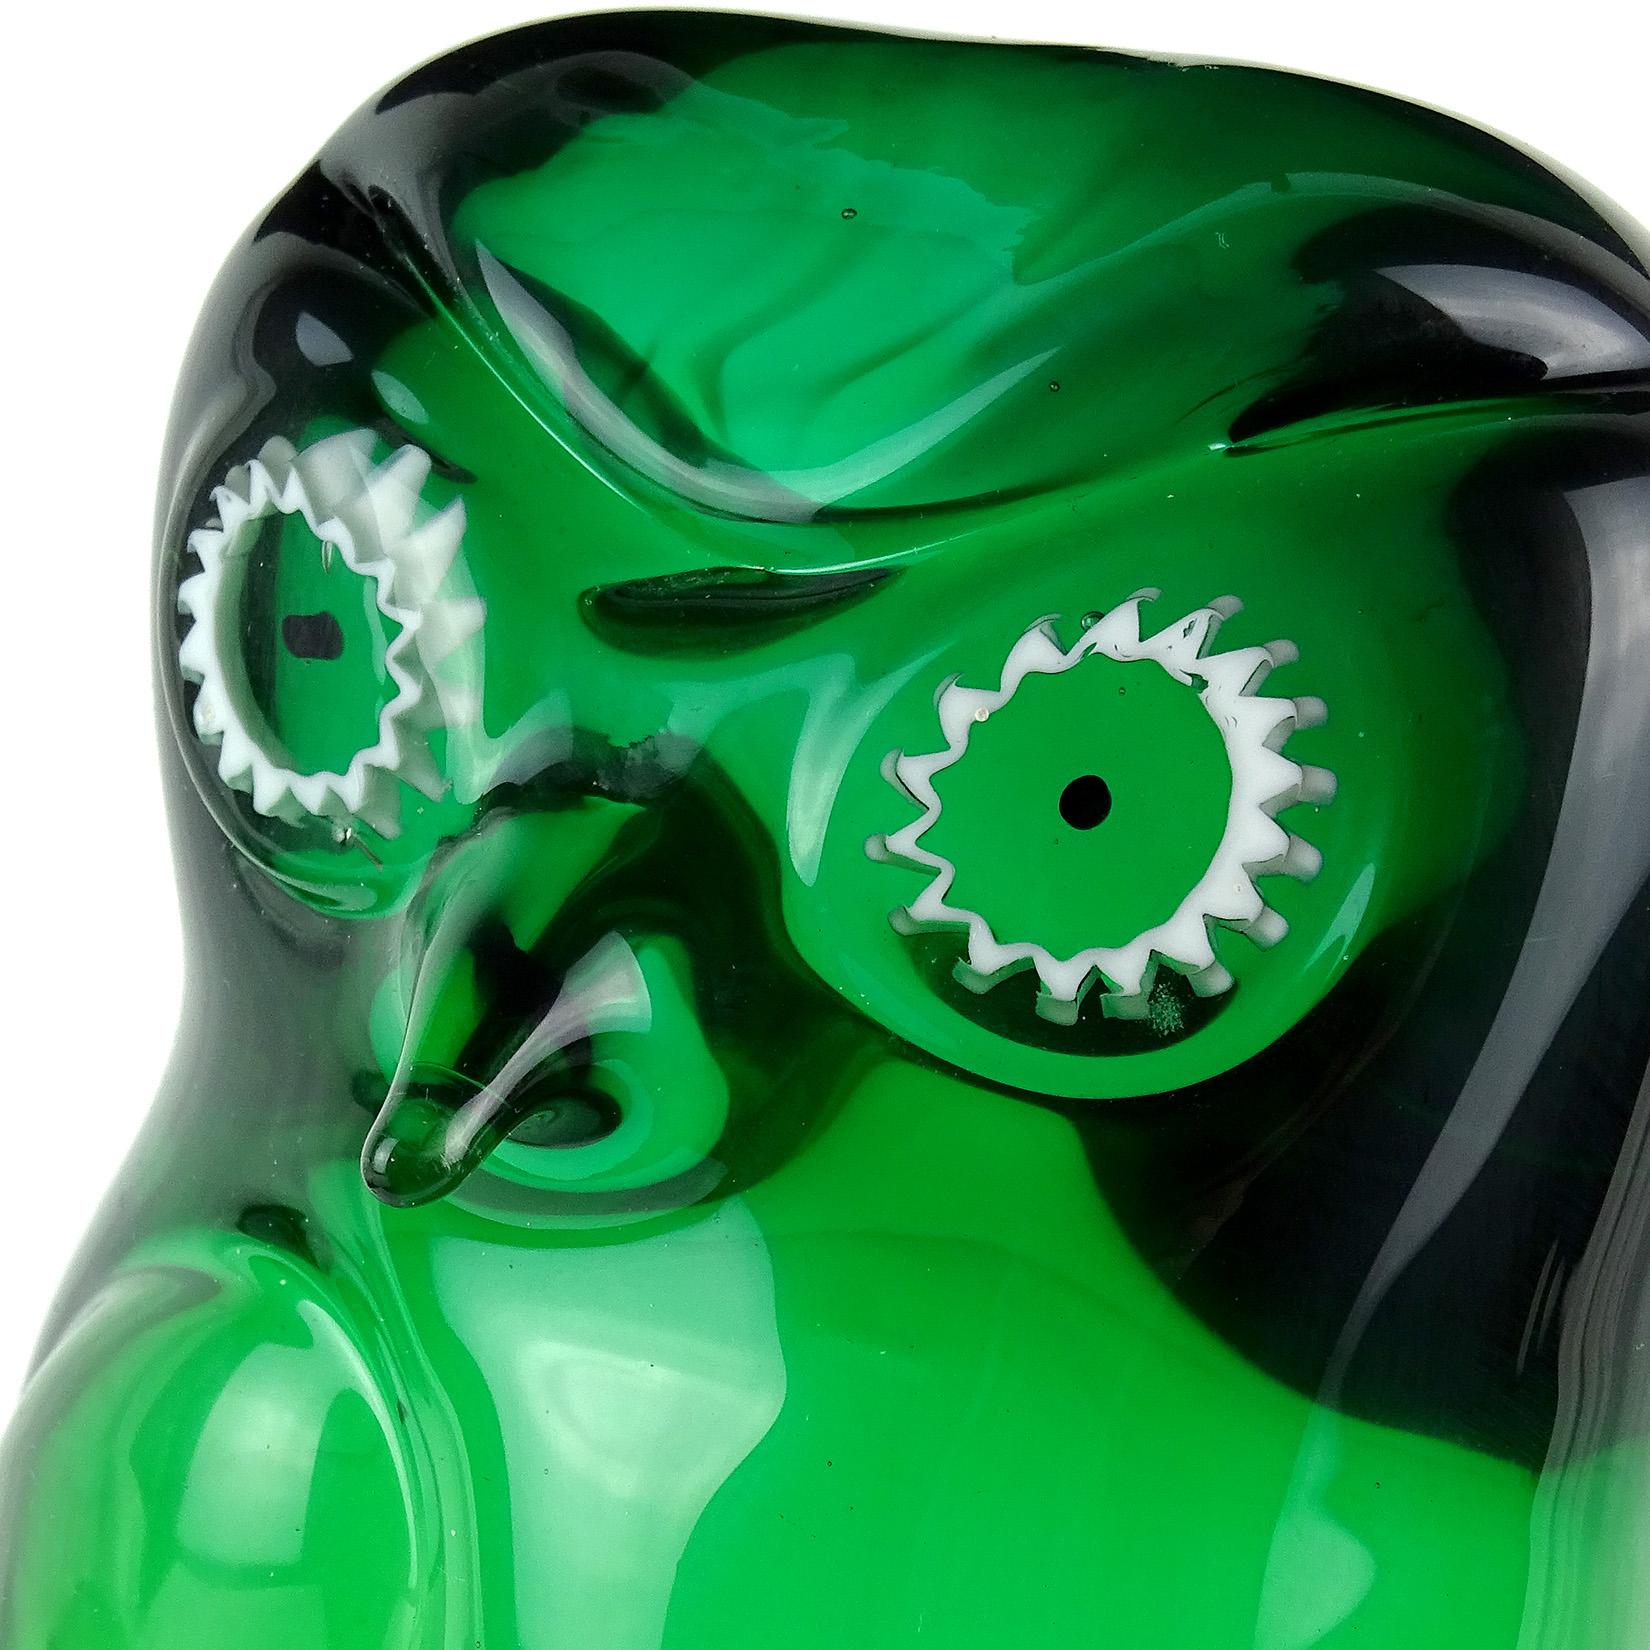 Beautiful Murano hand blown Sommerso green Italian art glass owl sculpture. Documented to the Salviati Company. It has white murrines for the eyes and stands on clear glass pedestal. Original Salviati gallery label underneath. Measures 8 3/4”